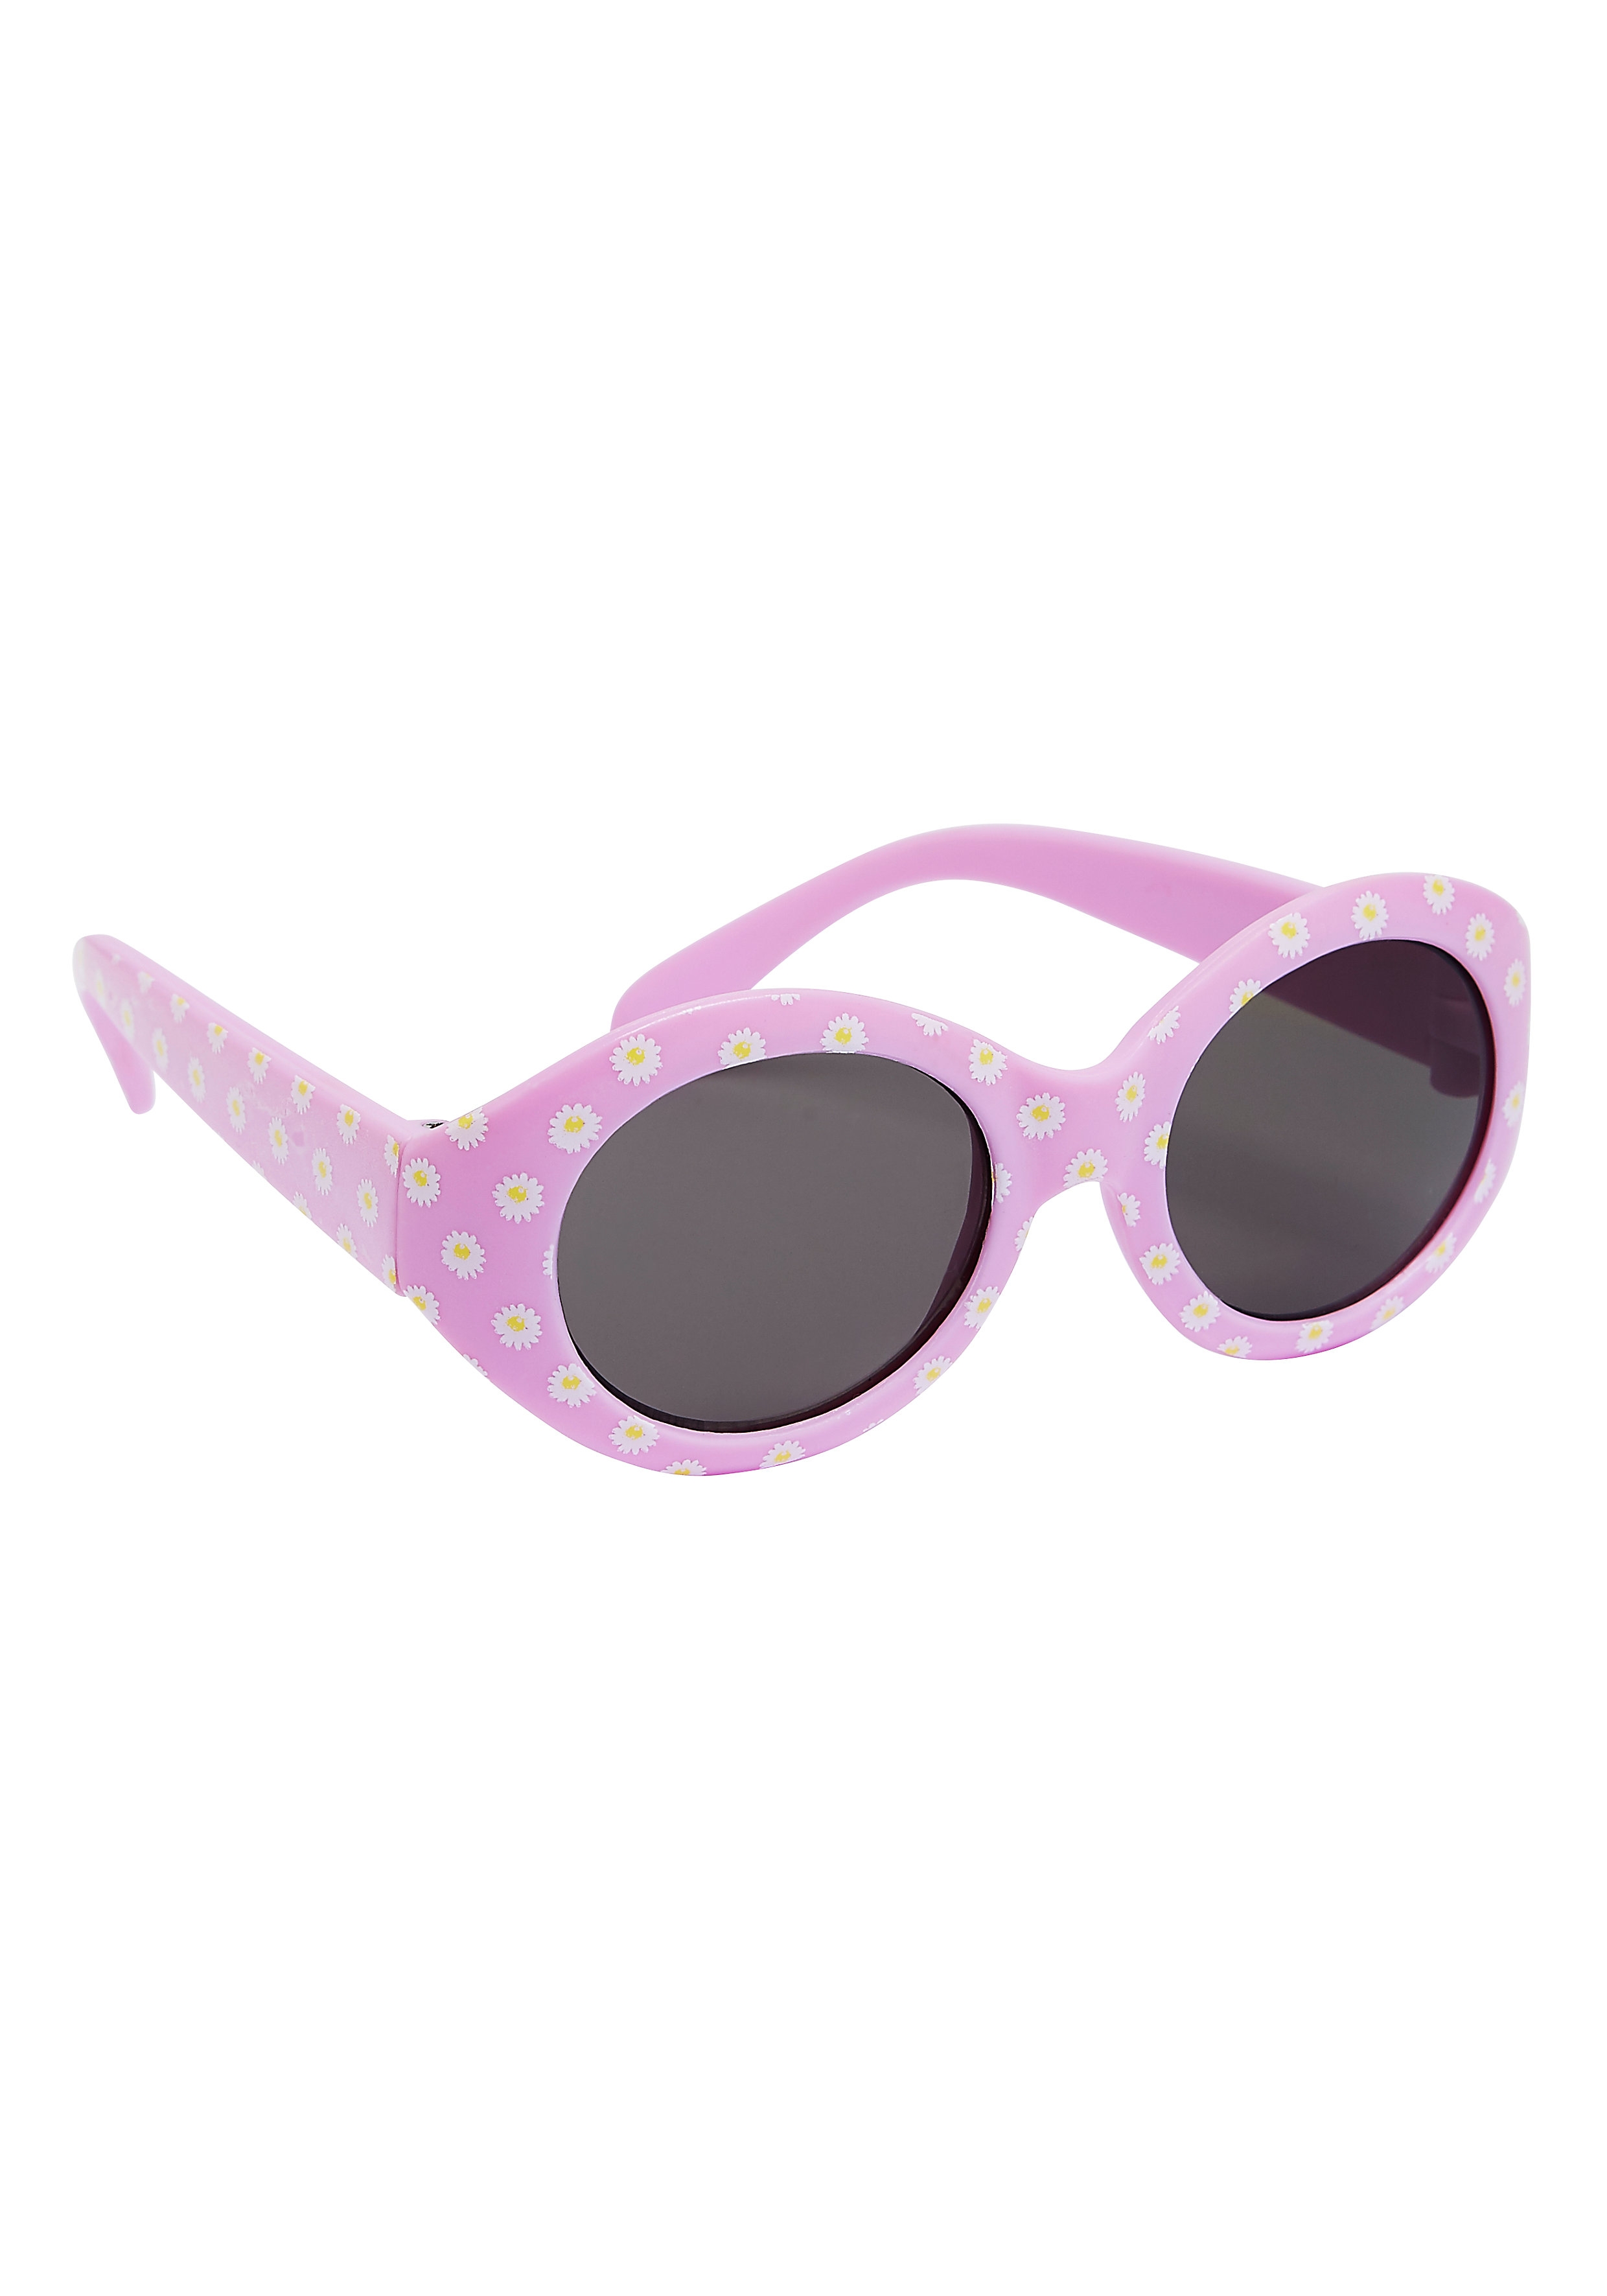 Mothercare | Girls Sunglasses Floral Print - Pink